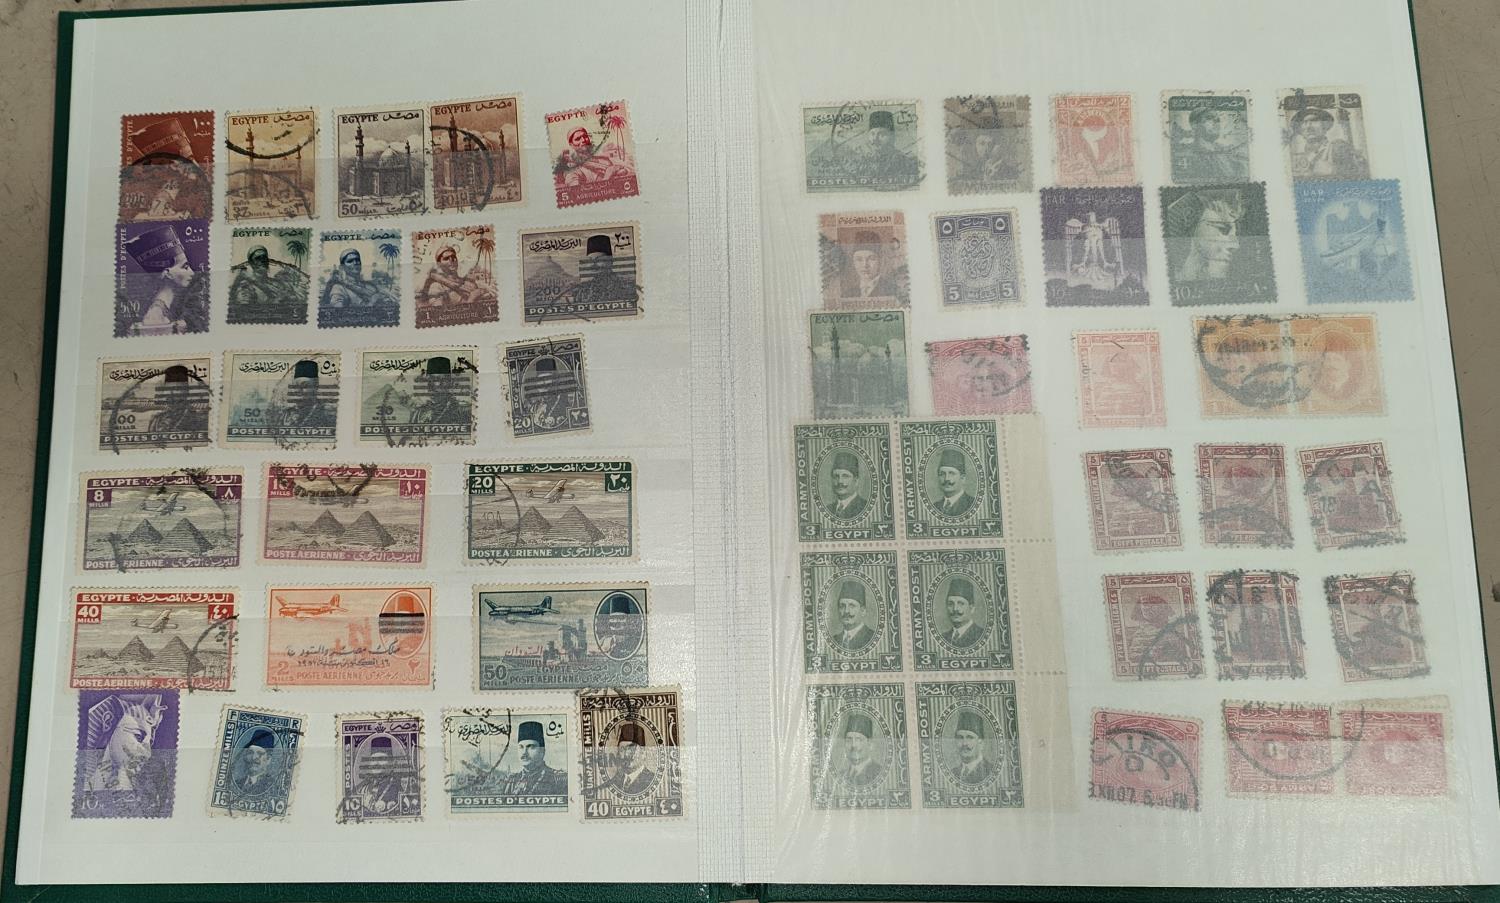 A book of Egyptian stamps.